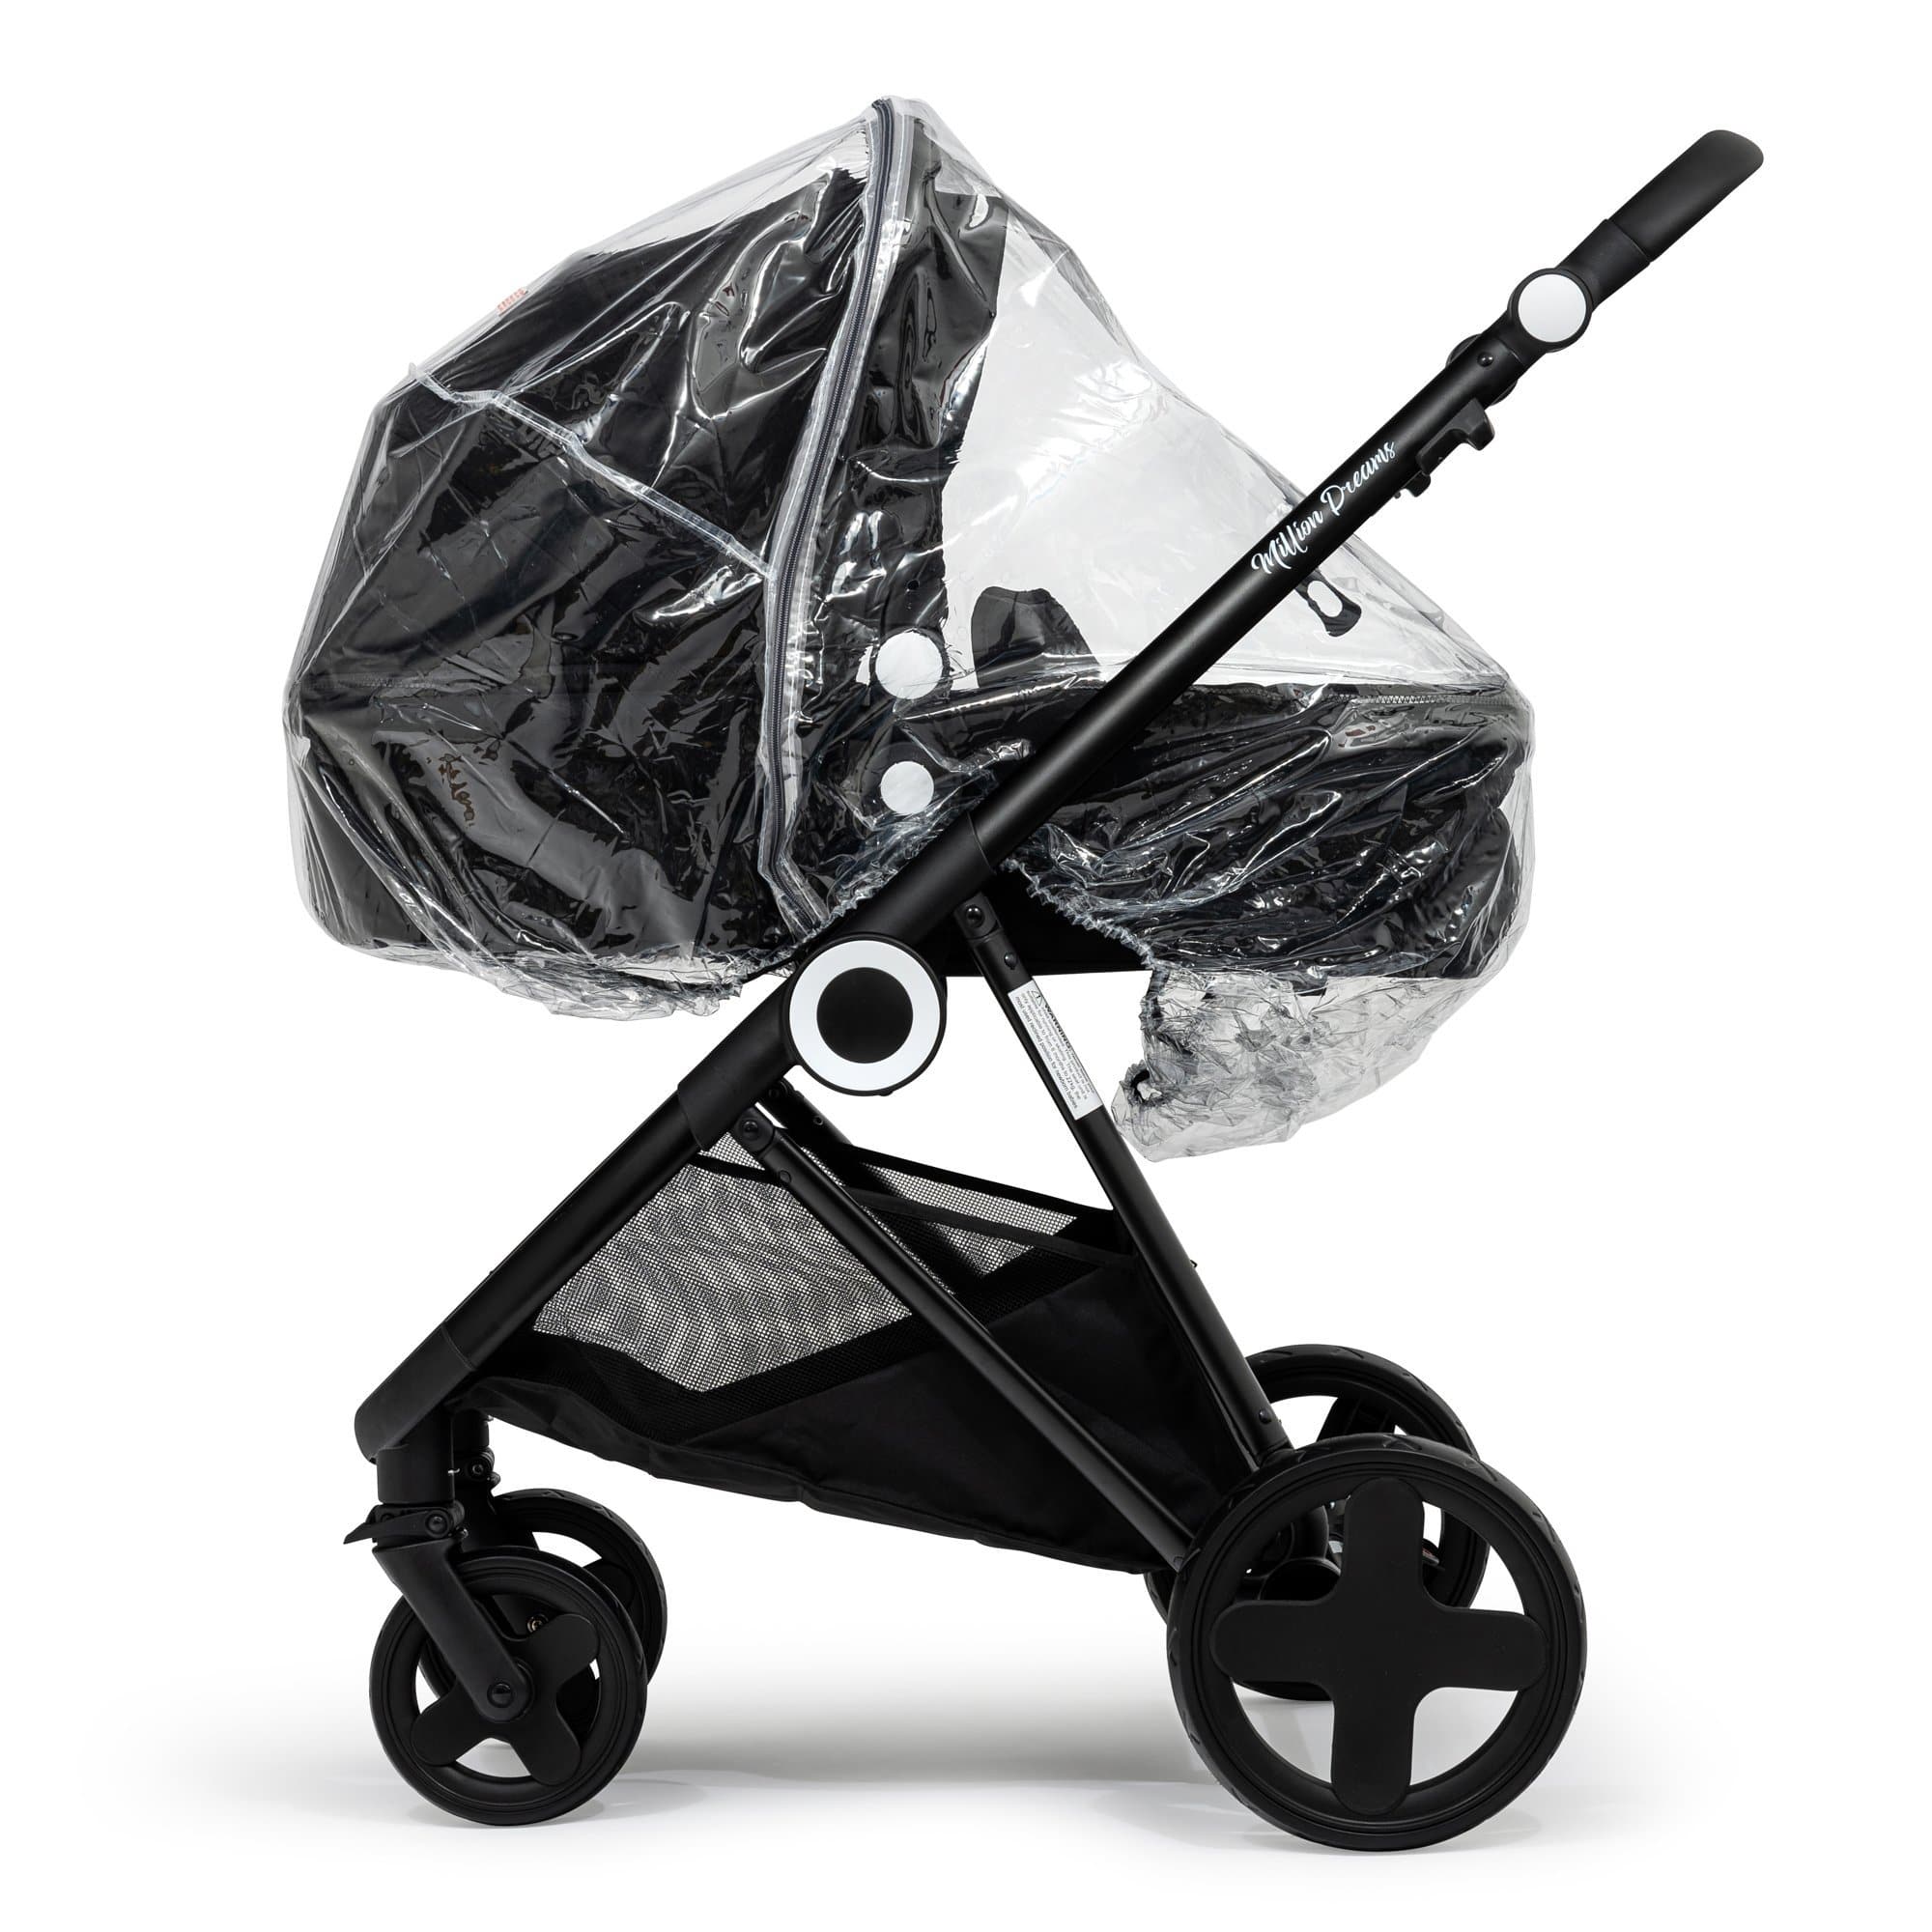 2 in 1 Rain Cover Compatible with Kinderkraft - Fits All Models - For Your Little One